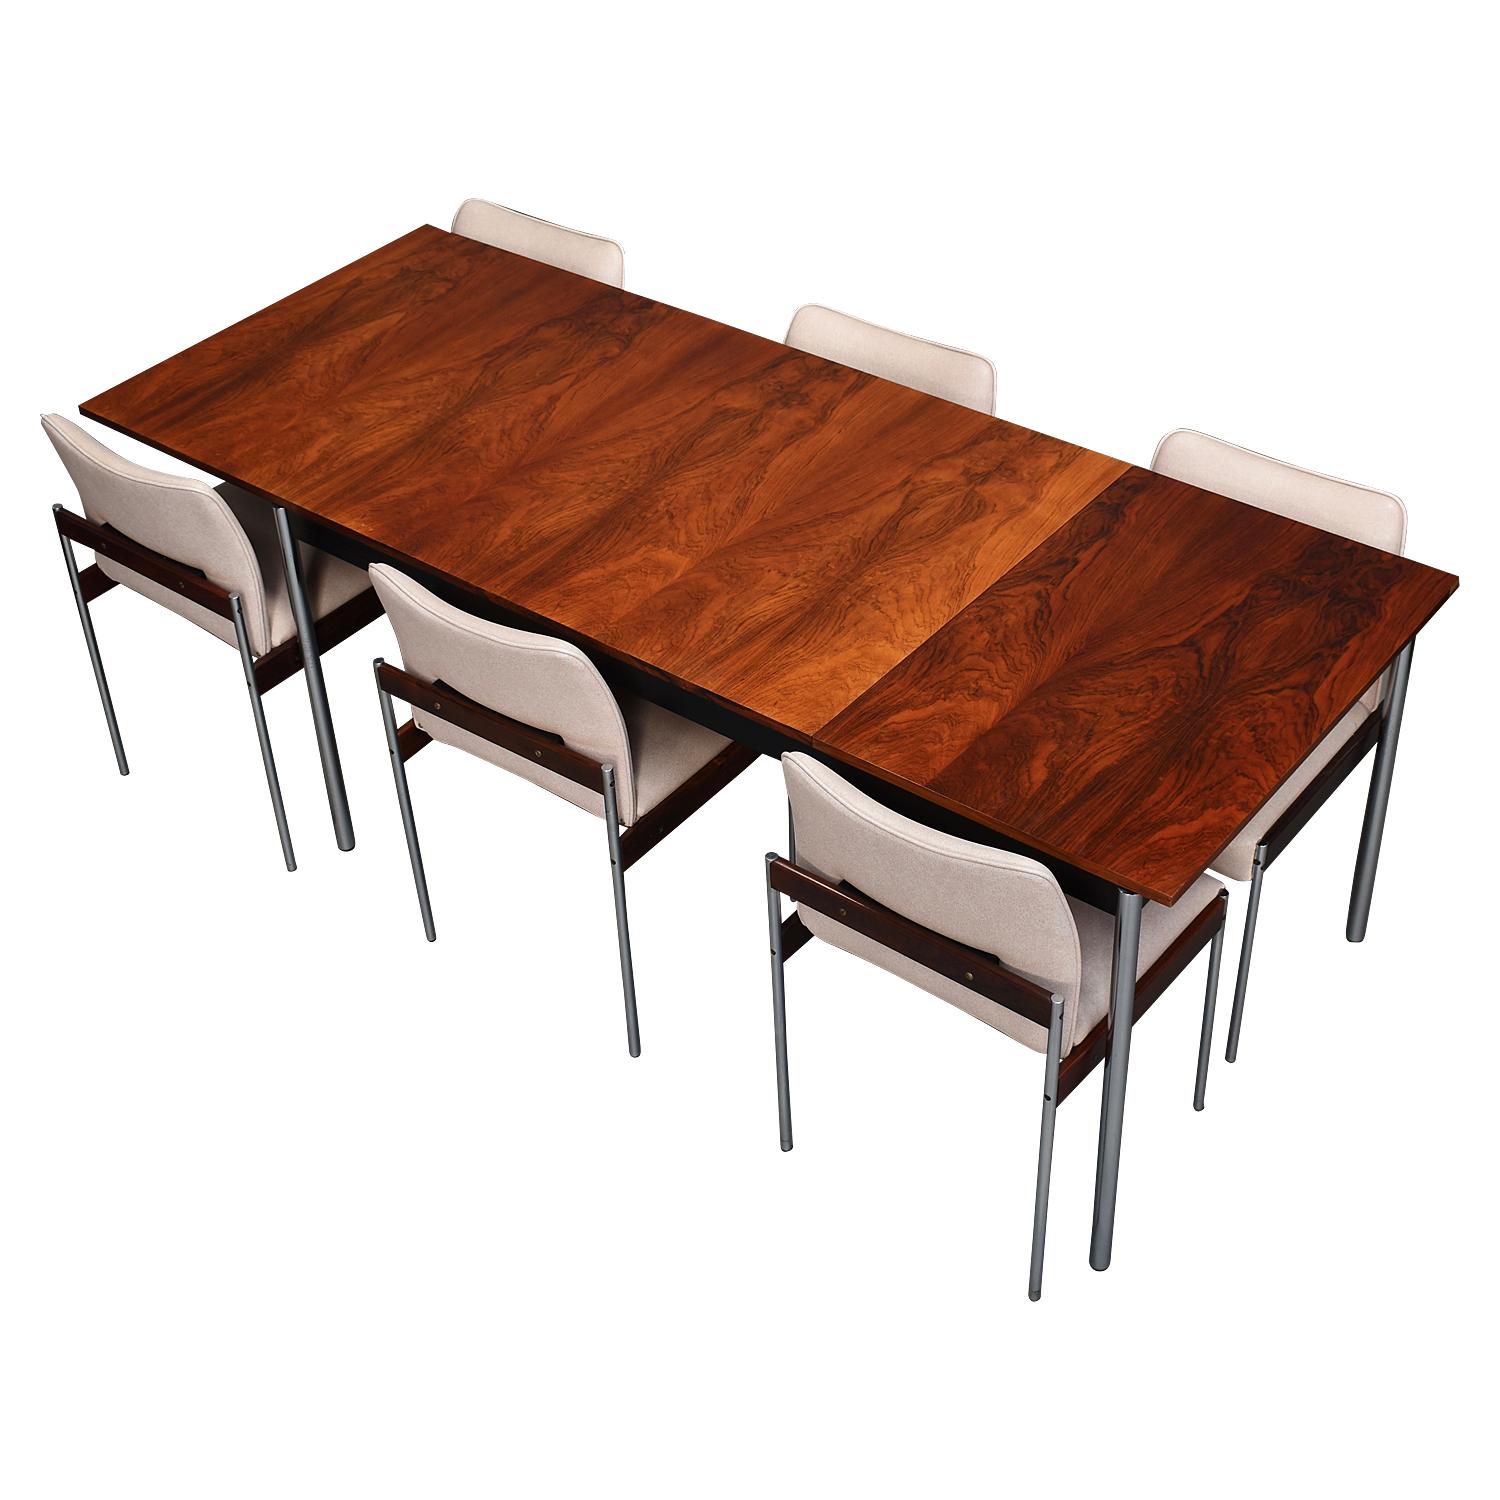 Italian Walnut and chrome dining set with 6 chairs.
Design attributed to or after Inger Klingenberg.

The table has one extension top.
The table is made of Italian Walnut veneer and chrome
The chairs are made of solid Italian Walnut, salmon pink